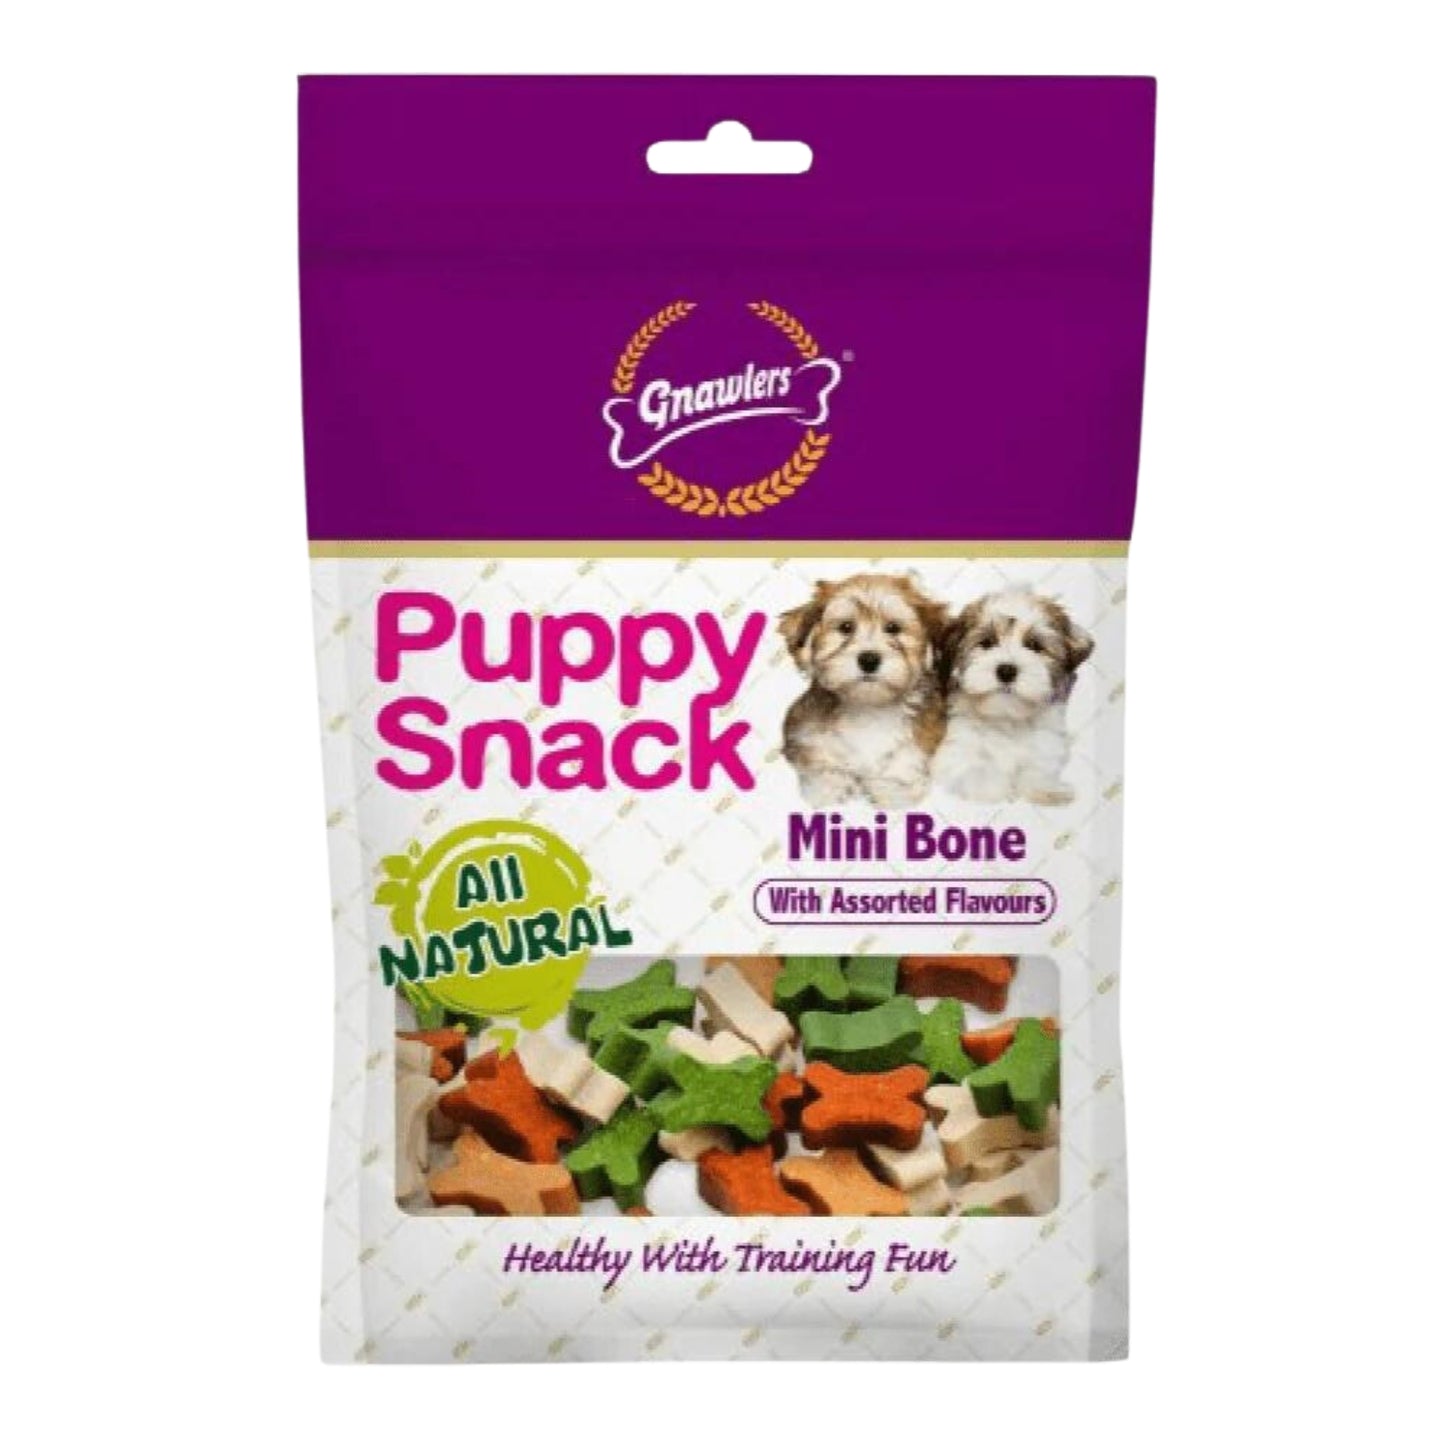 Gnawlers Puppy Snack Mini Bone Treat with Assorted Flavors - 250gm